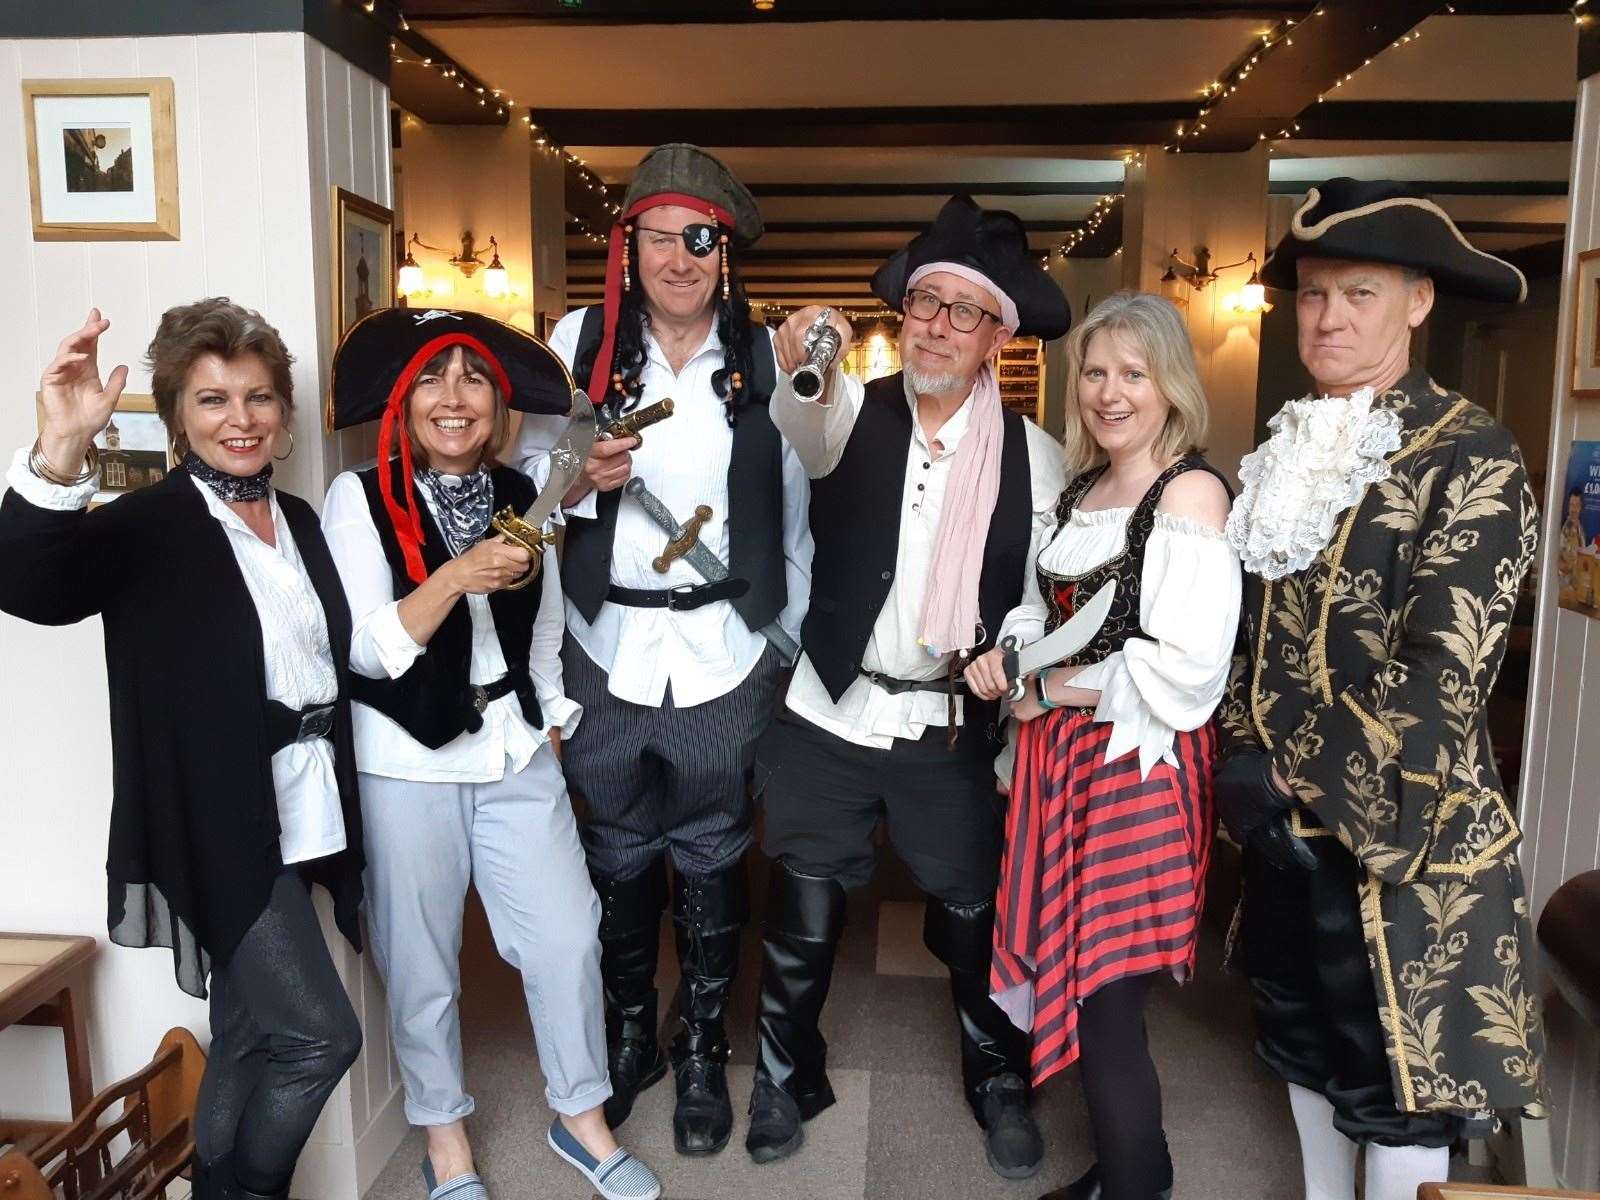 Members of Rotary Pirates Deal will hold their charity treasure hunt